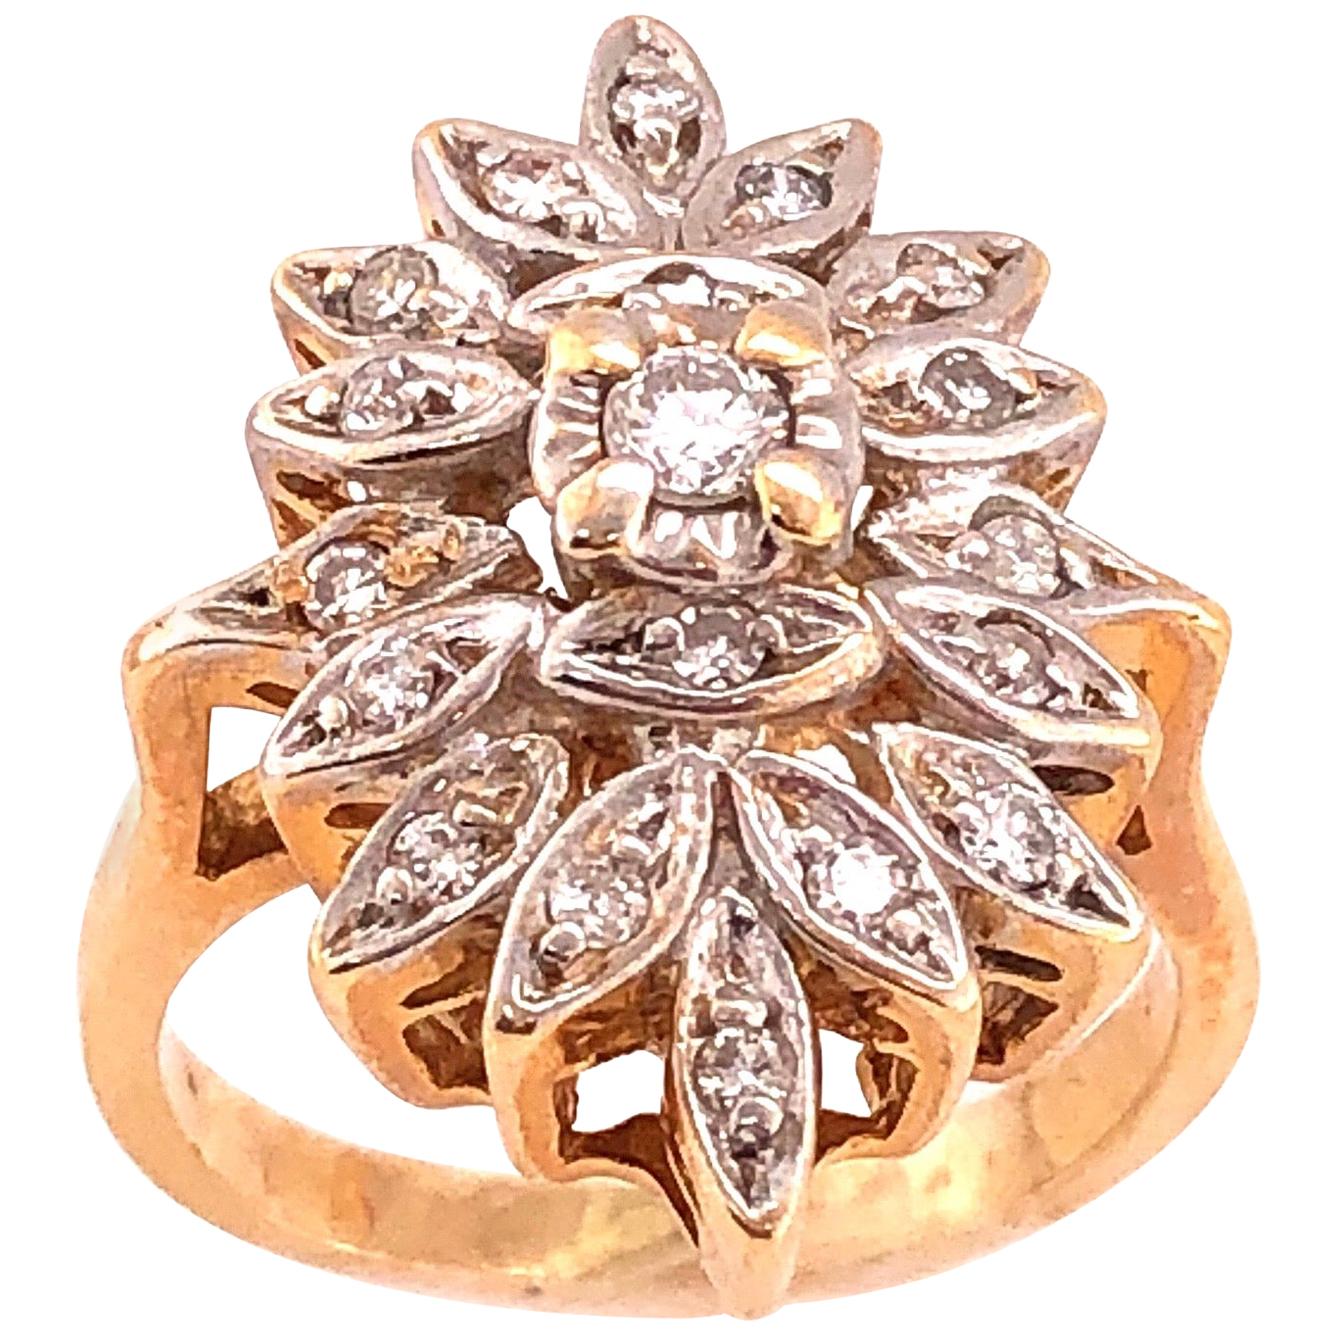 14 Karat Two-Tone White and Yellow Gold with Diamond Cluster Ring 0.50 TDW